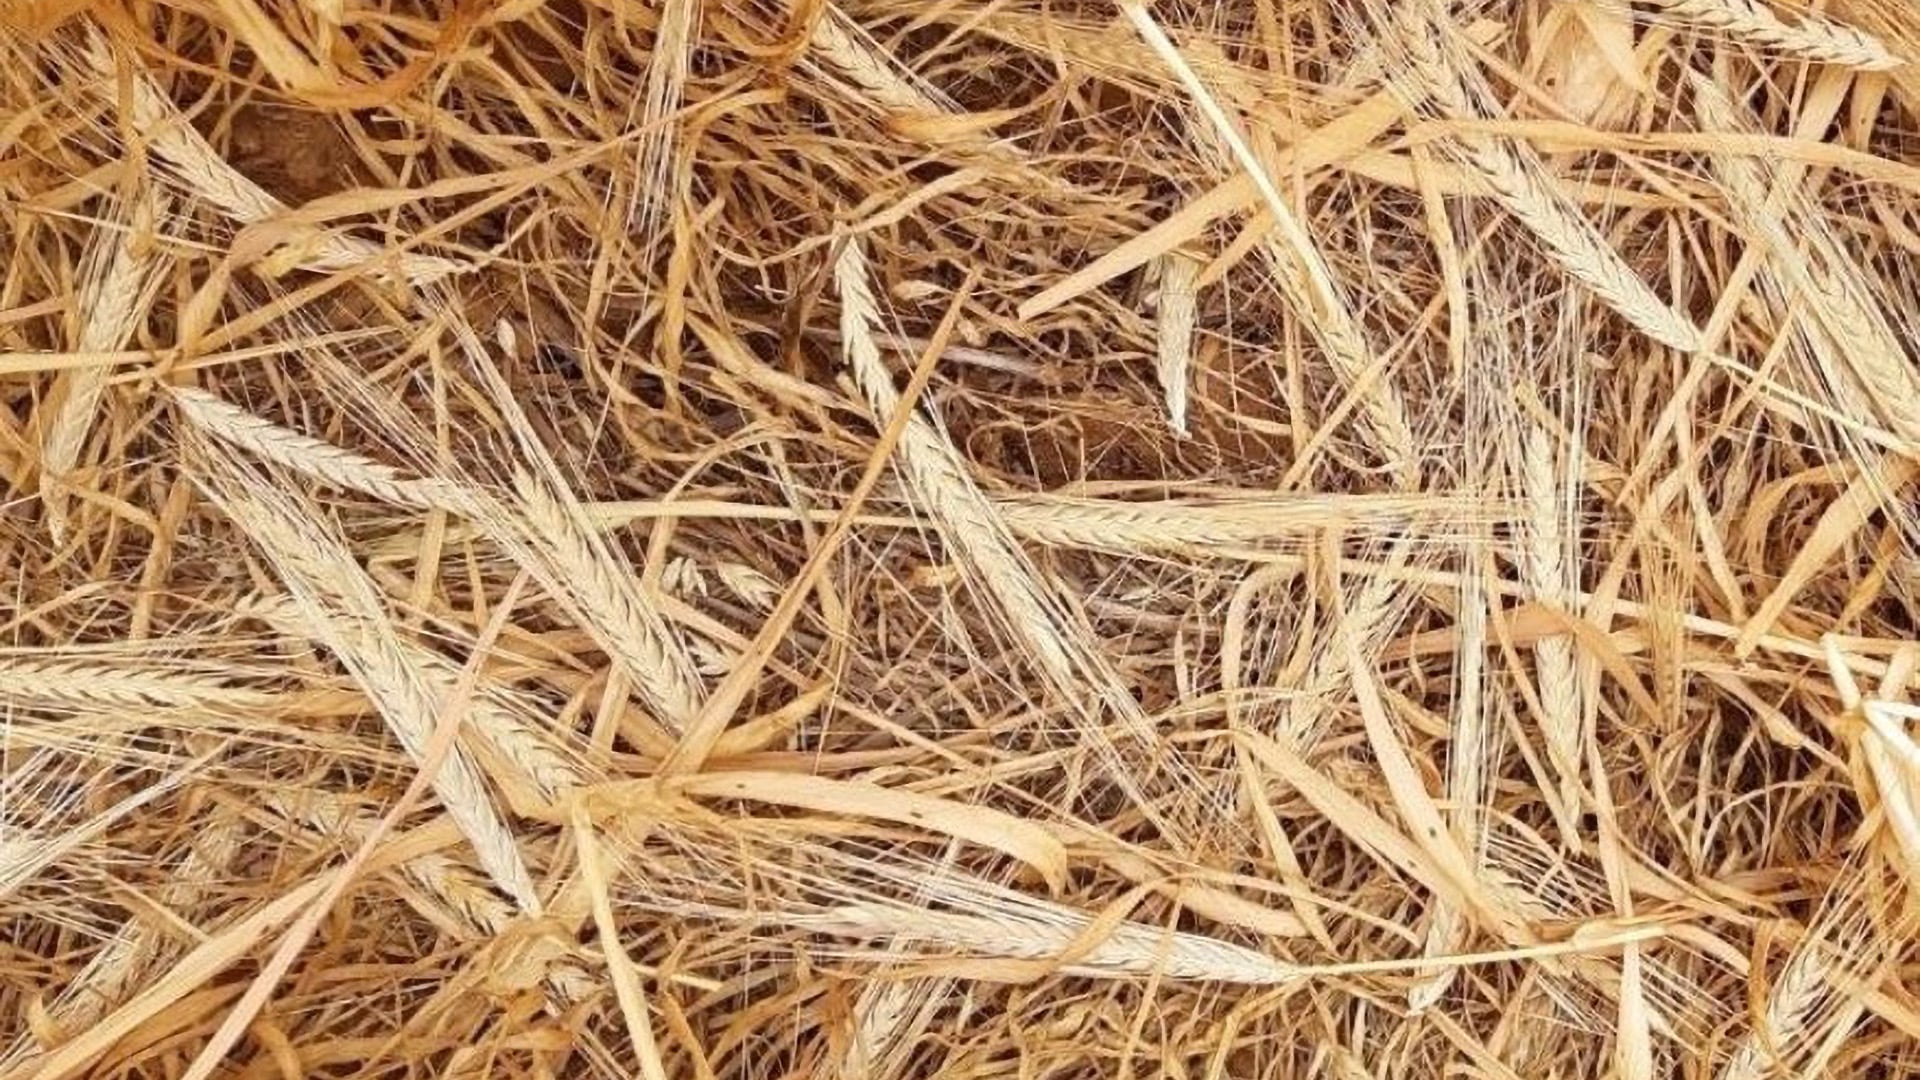 Revealing the basis for head loss in barley (UA619)